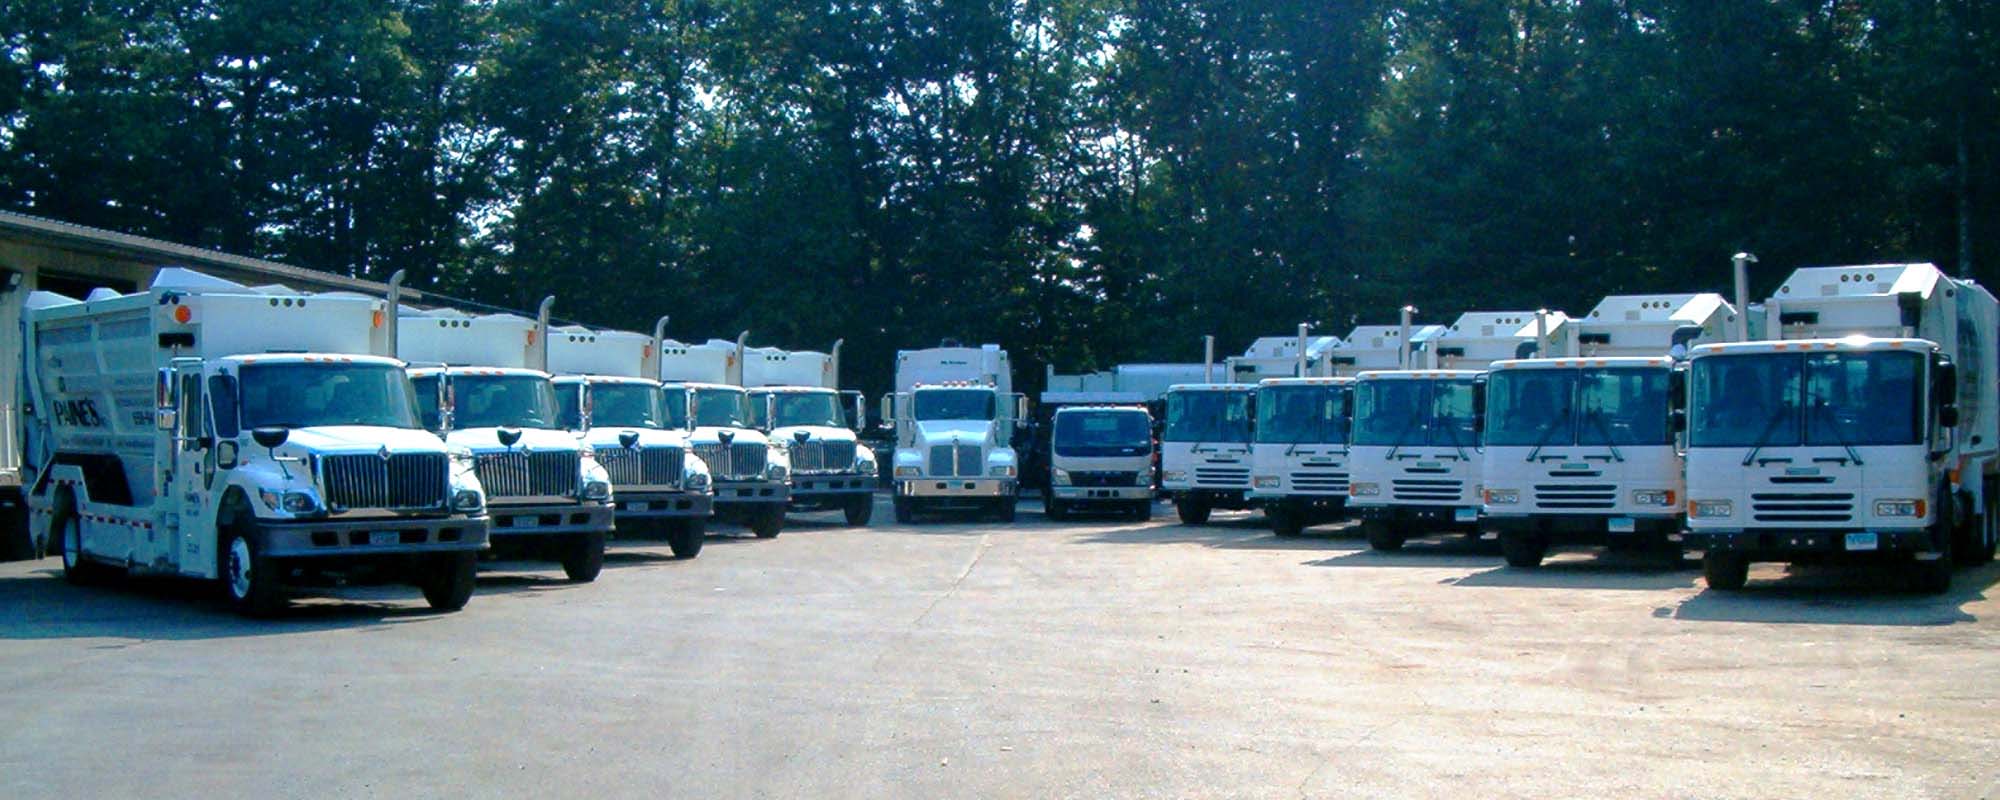 A lineup of white waste and recycling vehicles